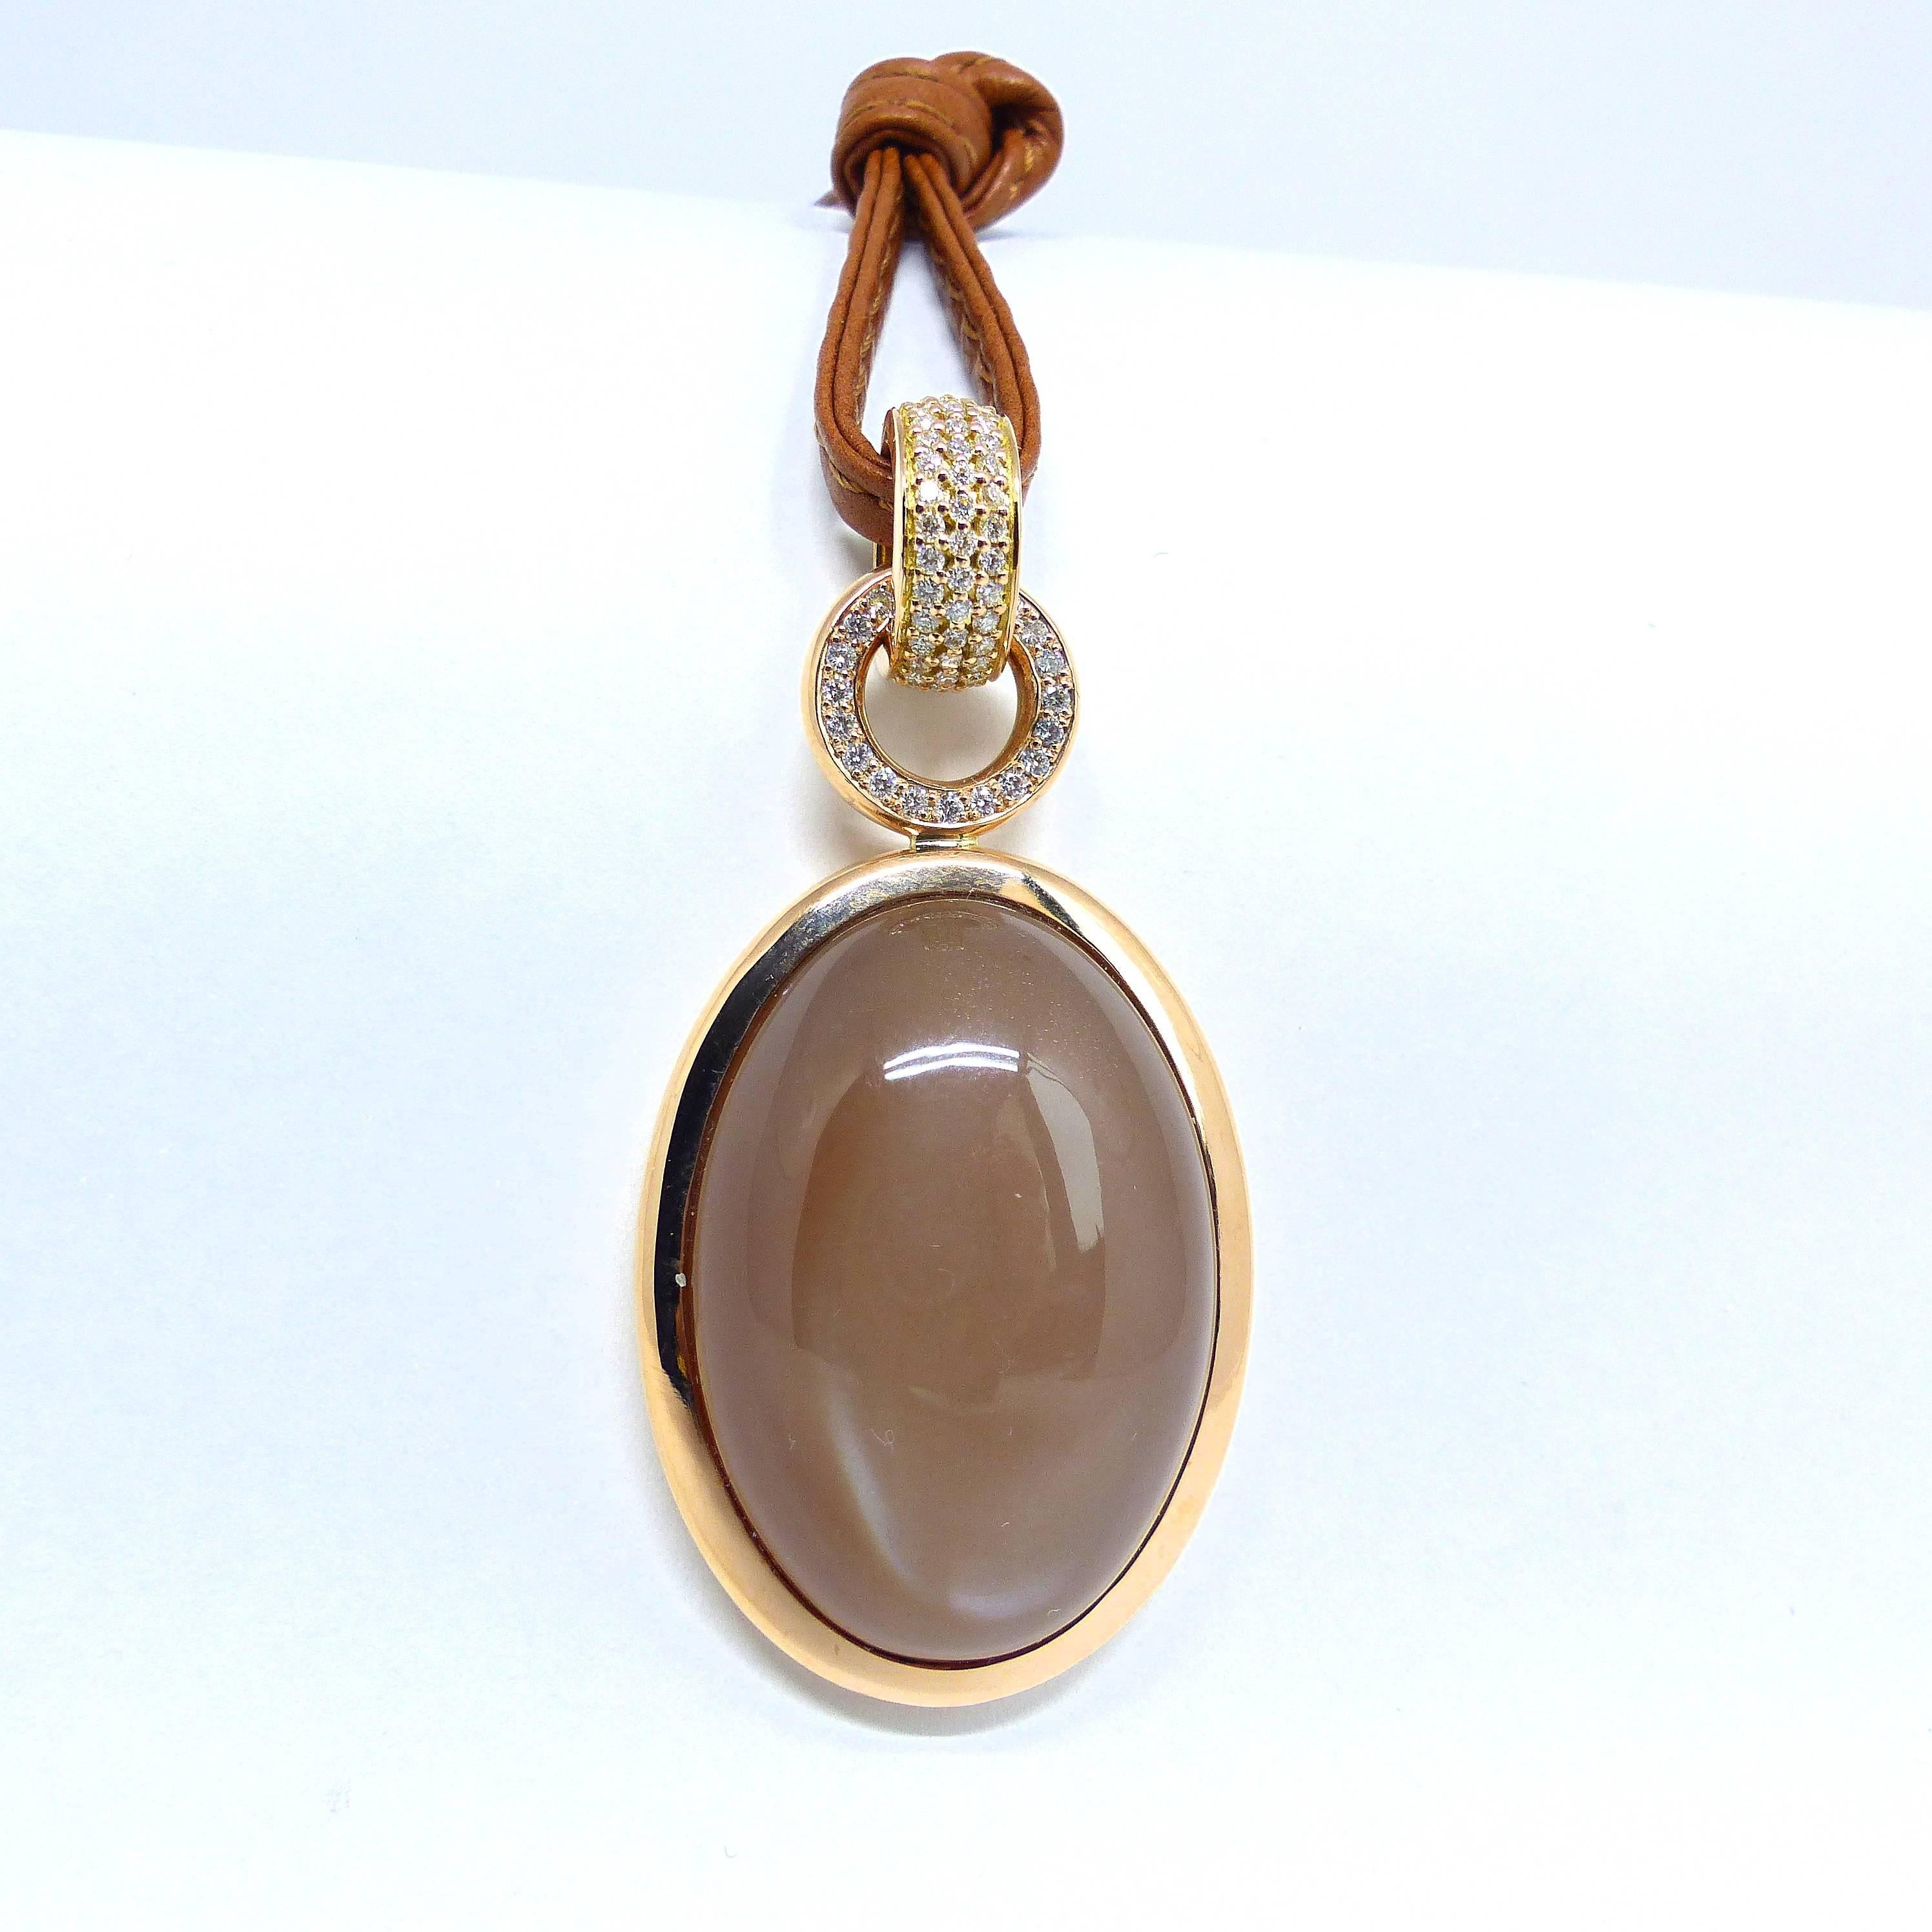 Thomas Leyser is renowned for his contemporary jewellery designs utilizing fine coloured gemstones and diamonds. 

This pendant in 18k red gold is set with a fine oval brown Moonstone Cabouchon 66,03ct. in top quality (36x25mm). It is accentuated by